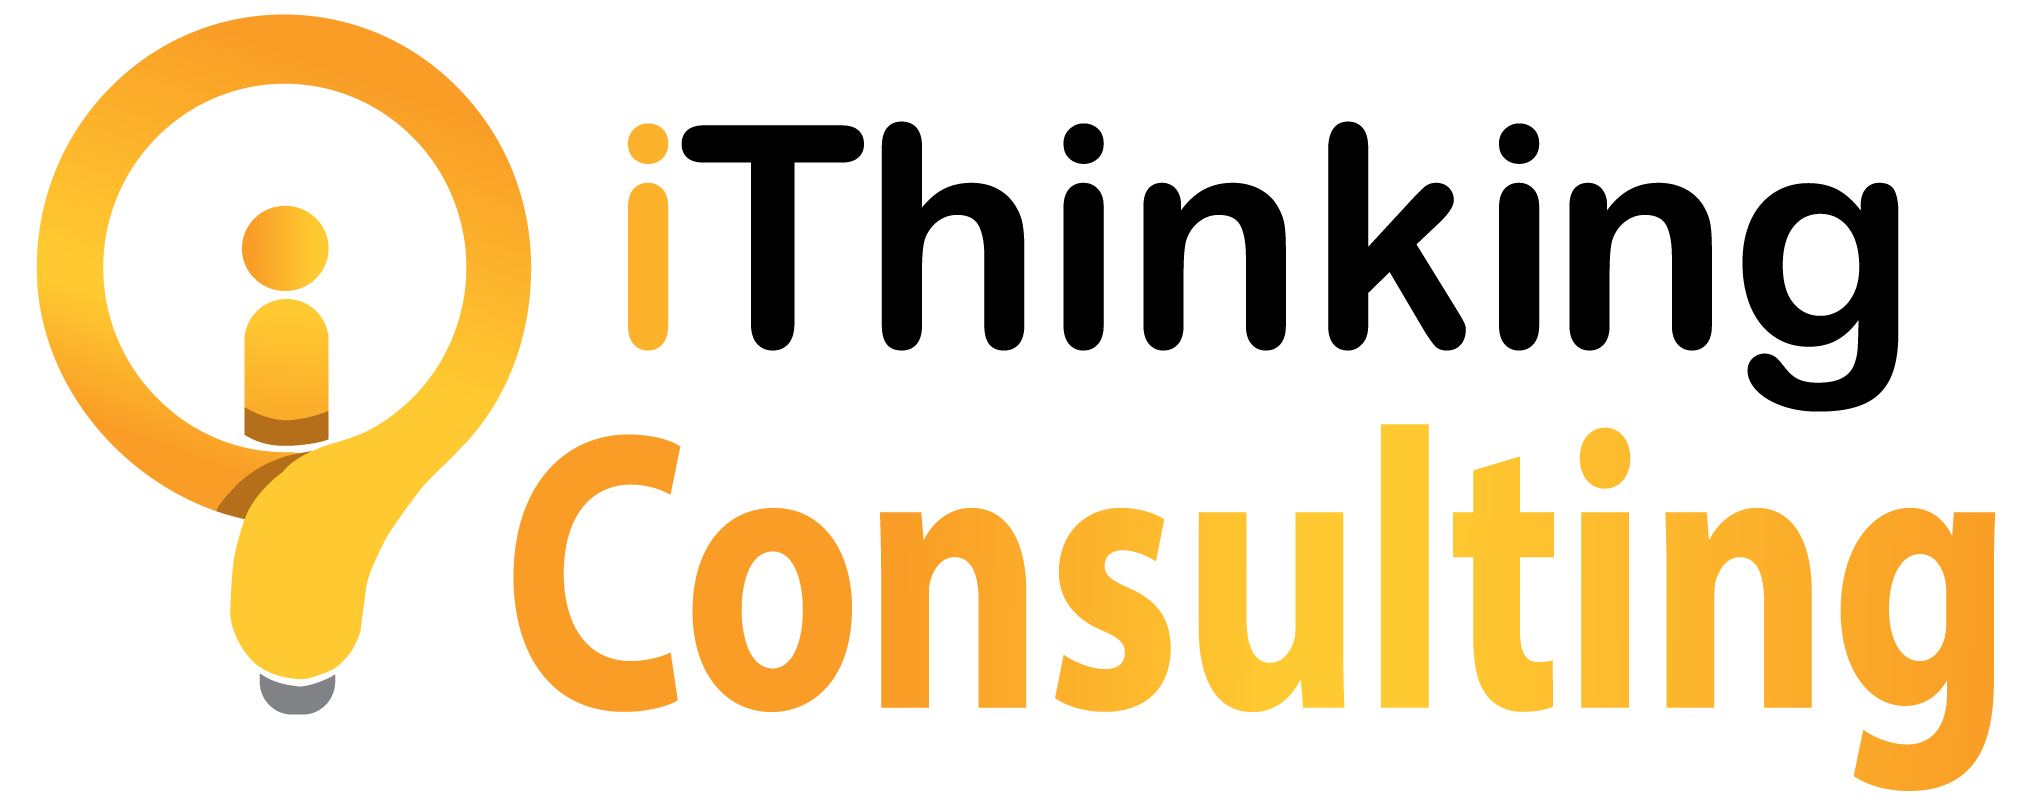 iThinking Consulting Co., Ltd.